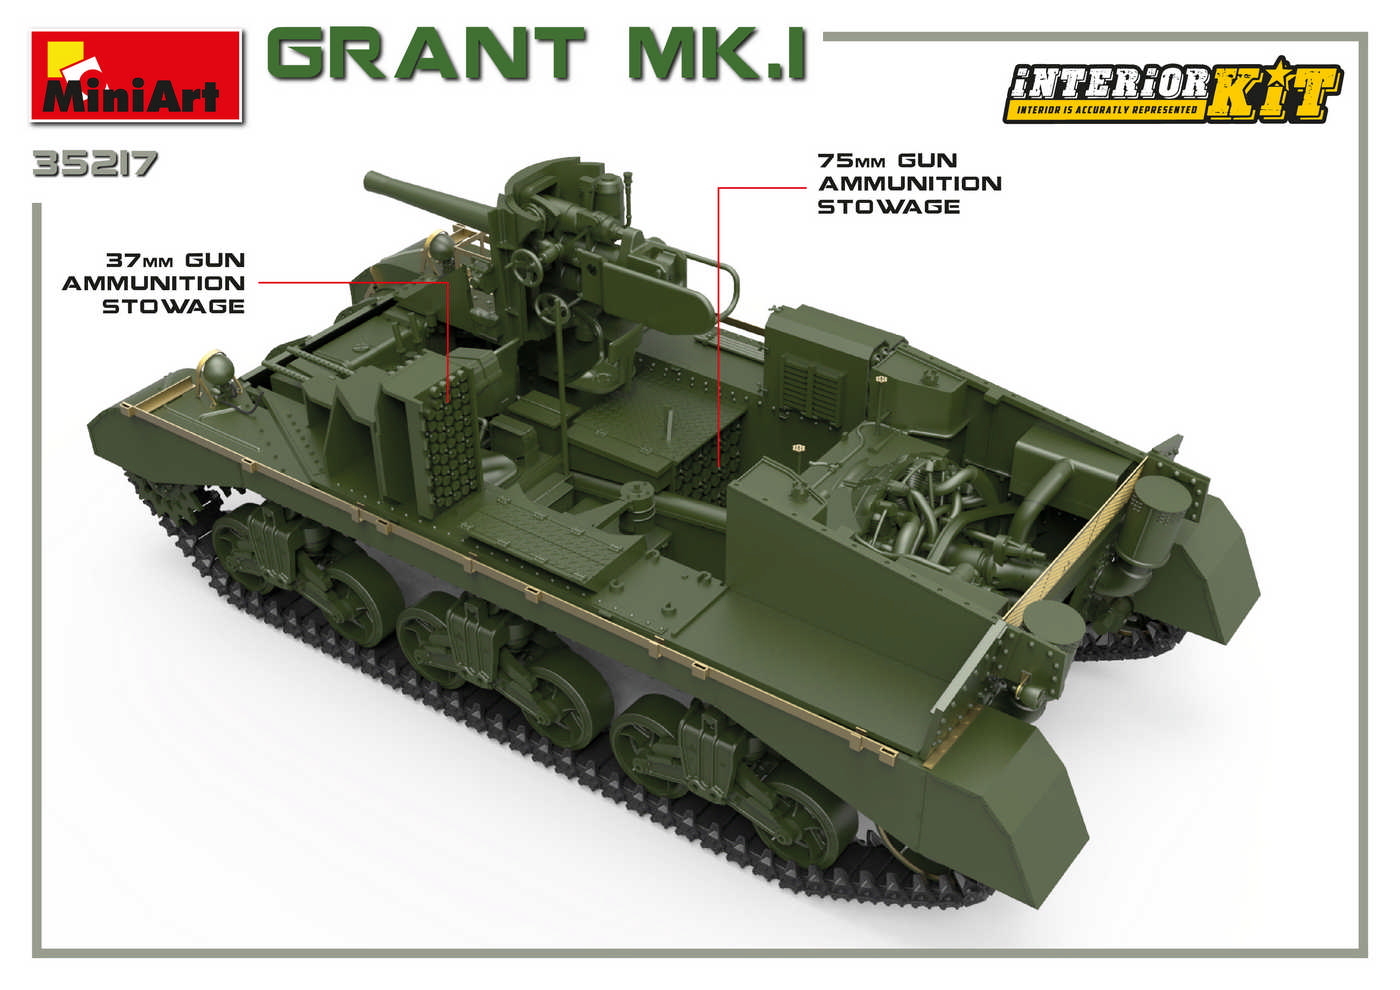 The Modelling News Preview The New 35th Scale Grant Mk I